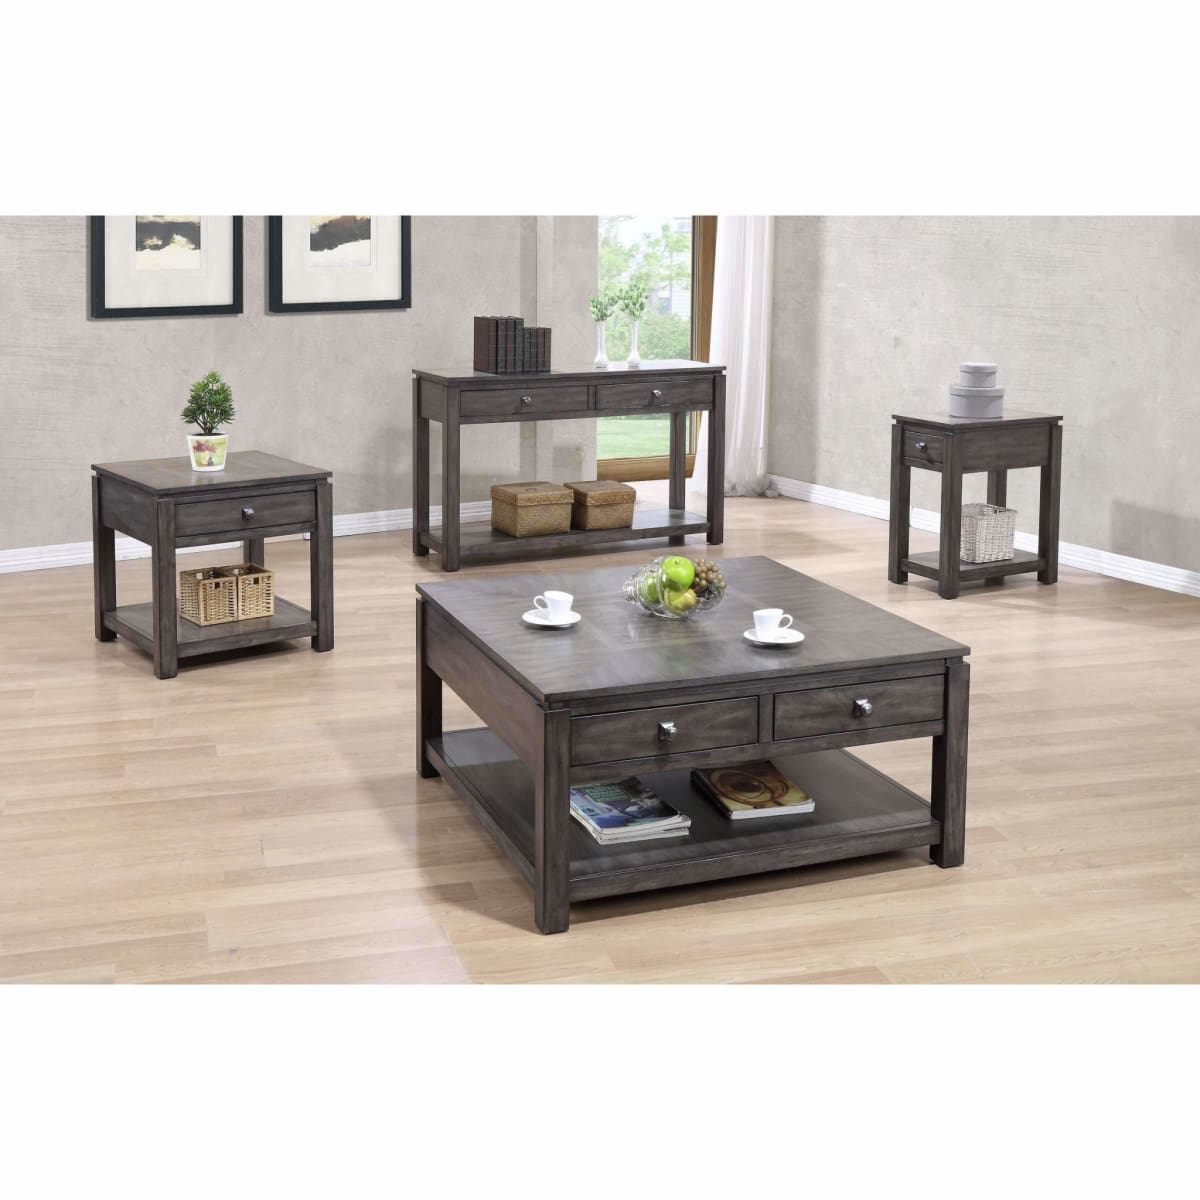 Lancaster 24 End Table - END TABLE/SIDE TABLE